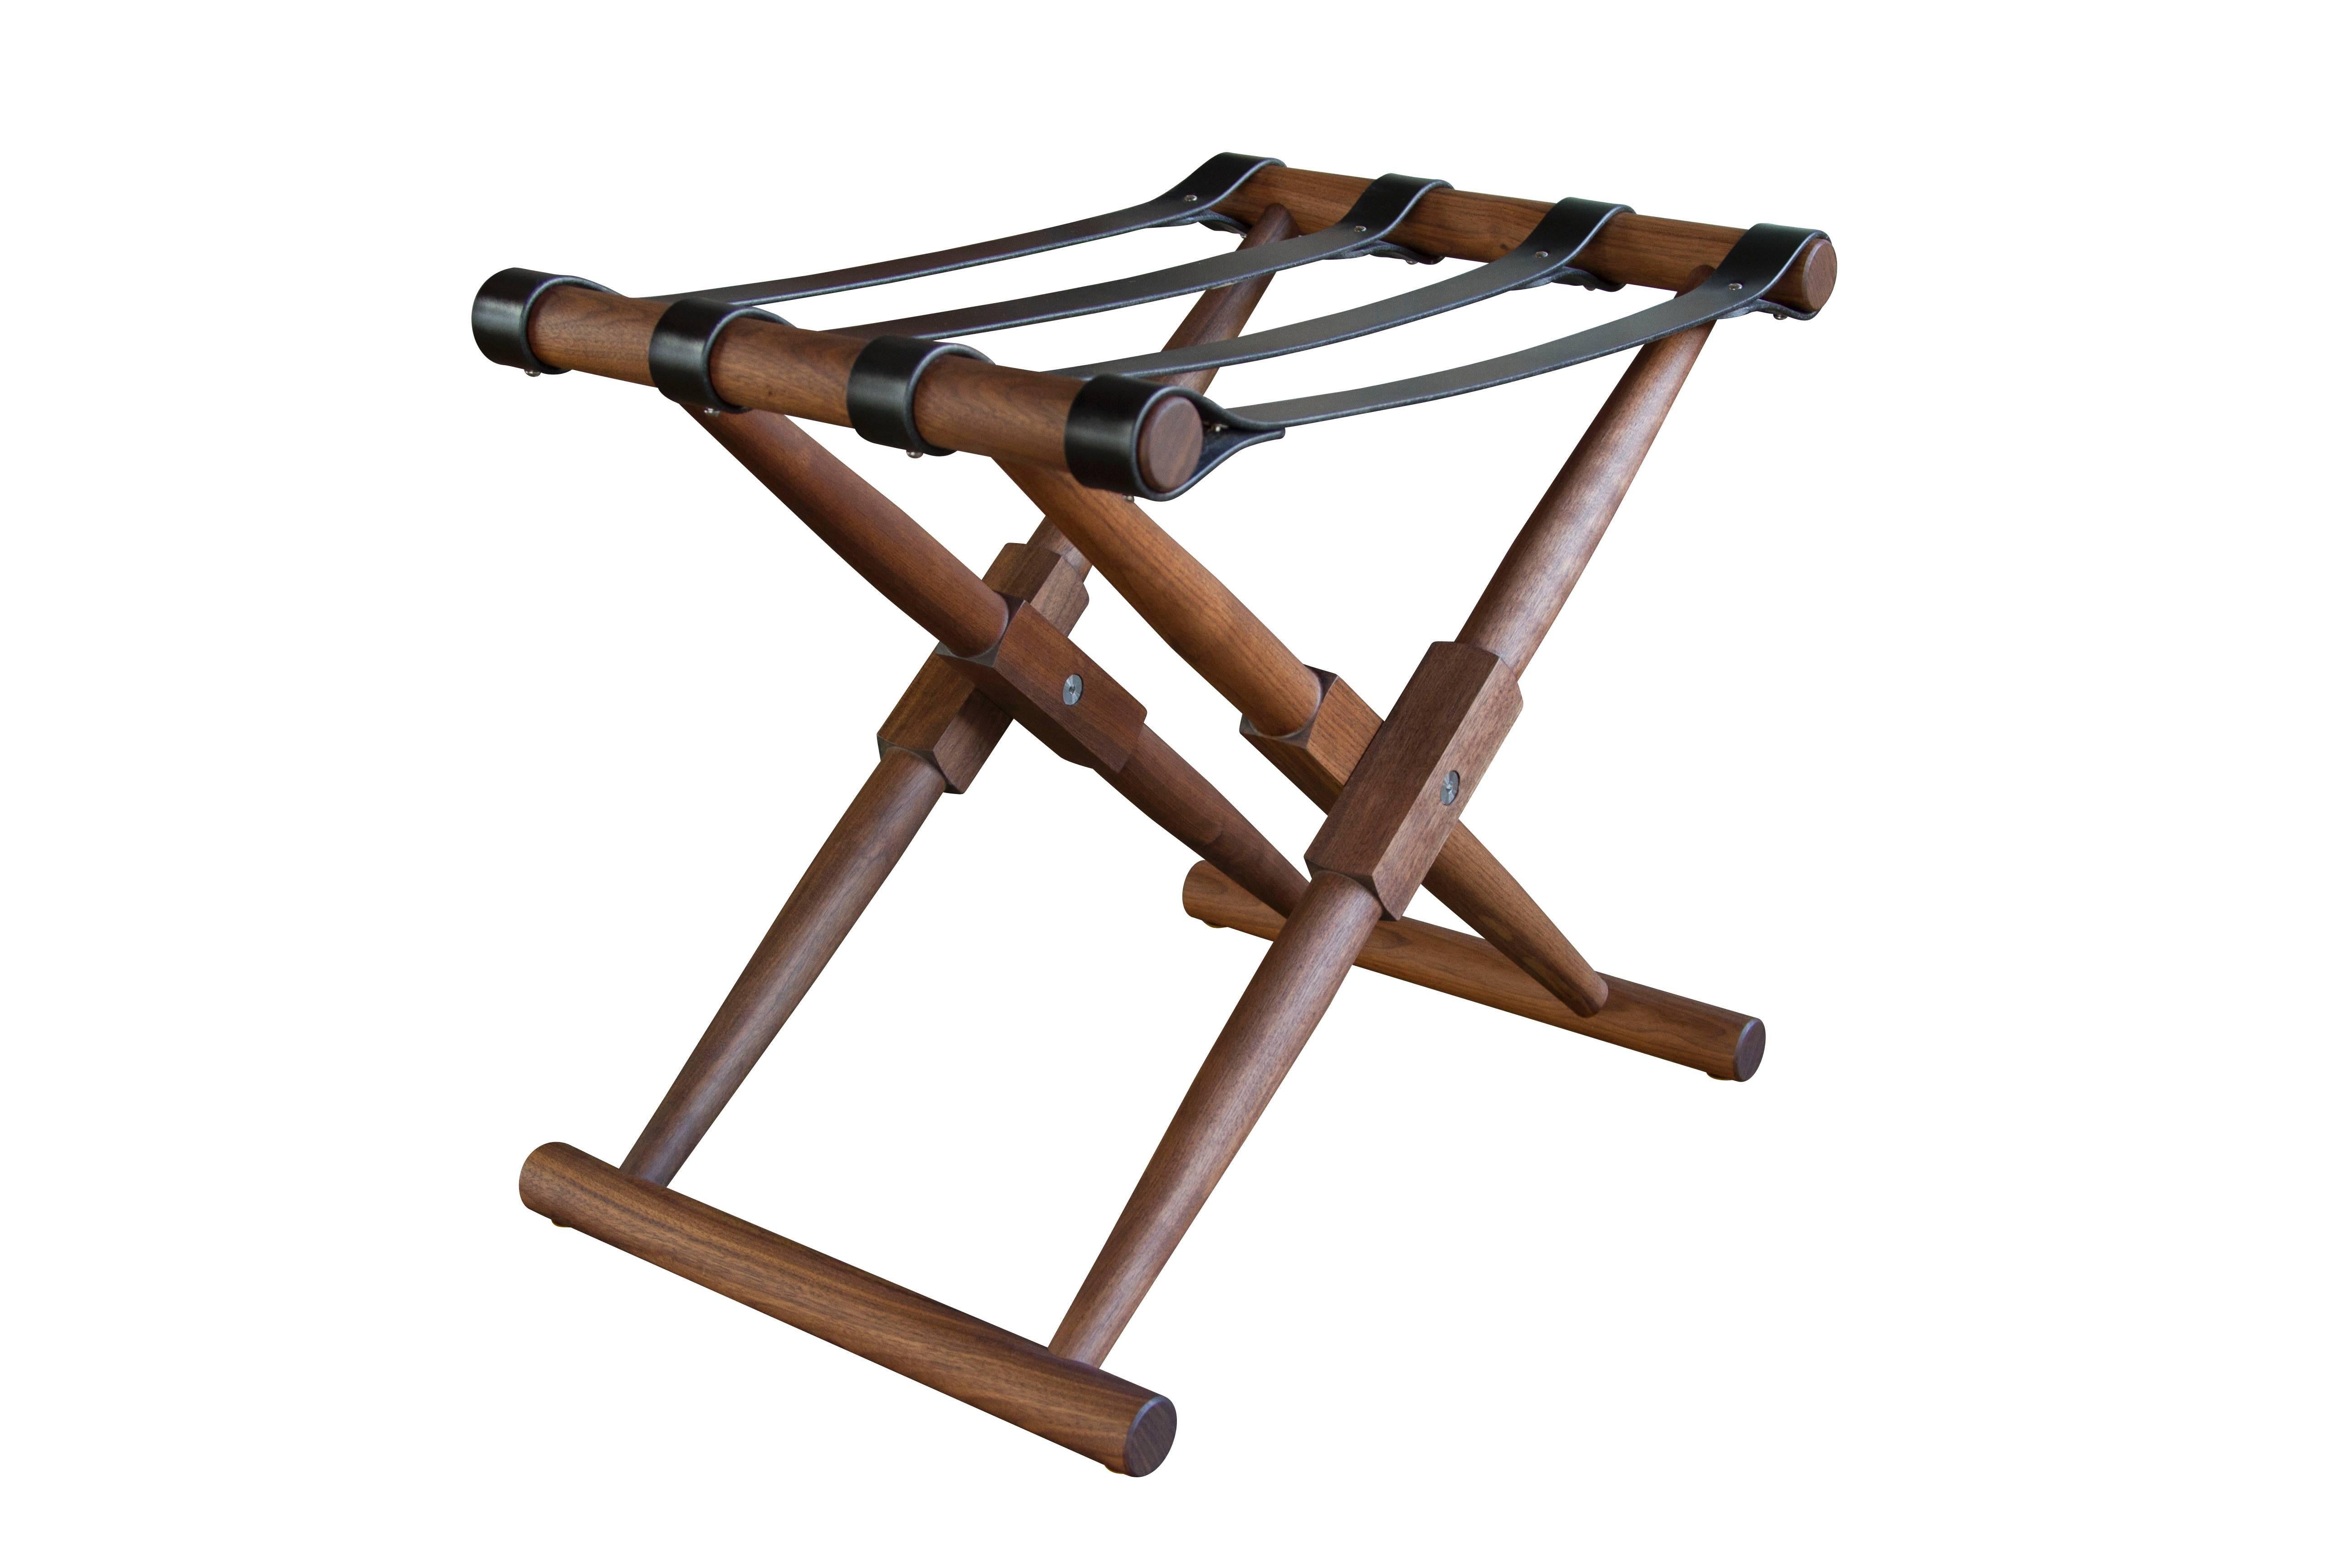 The Matthiessen luggage rack in oiled walnut with dark chocolate English bridle leather straps.

The modern campaign collection by Richard Wrightman combines the vernacular of traditional form with a modern aesthetic, mixing memory with invention,